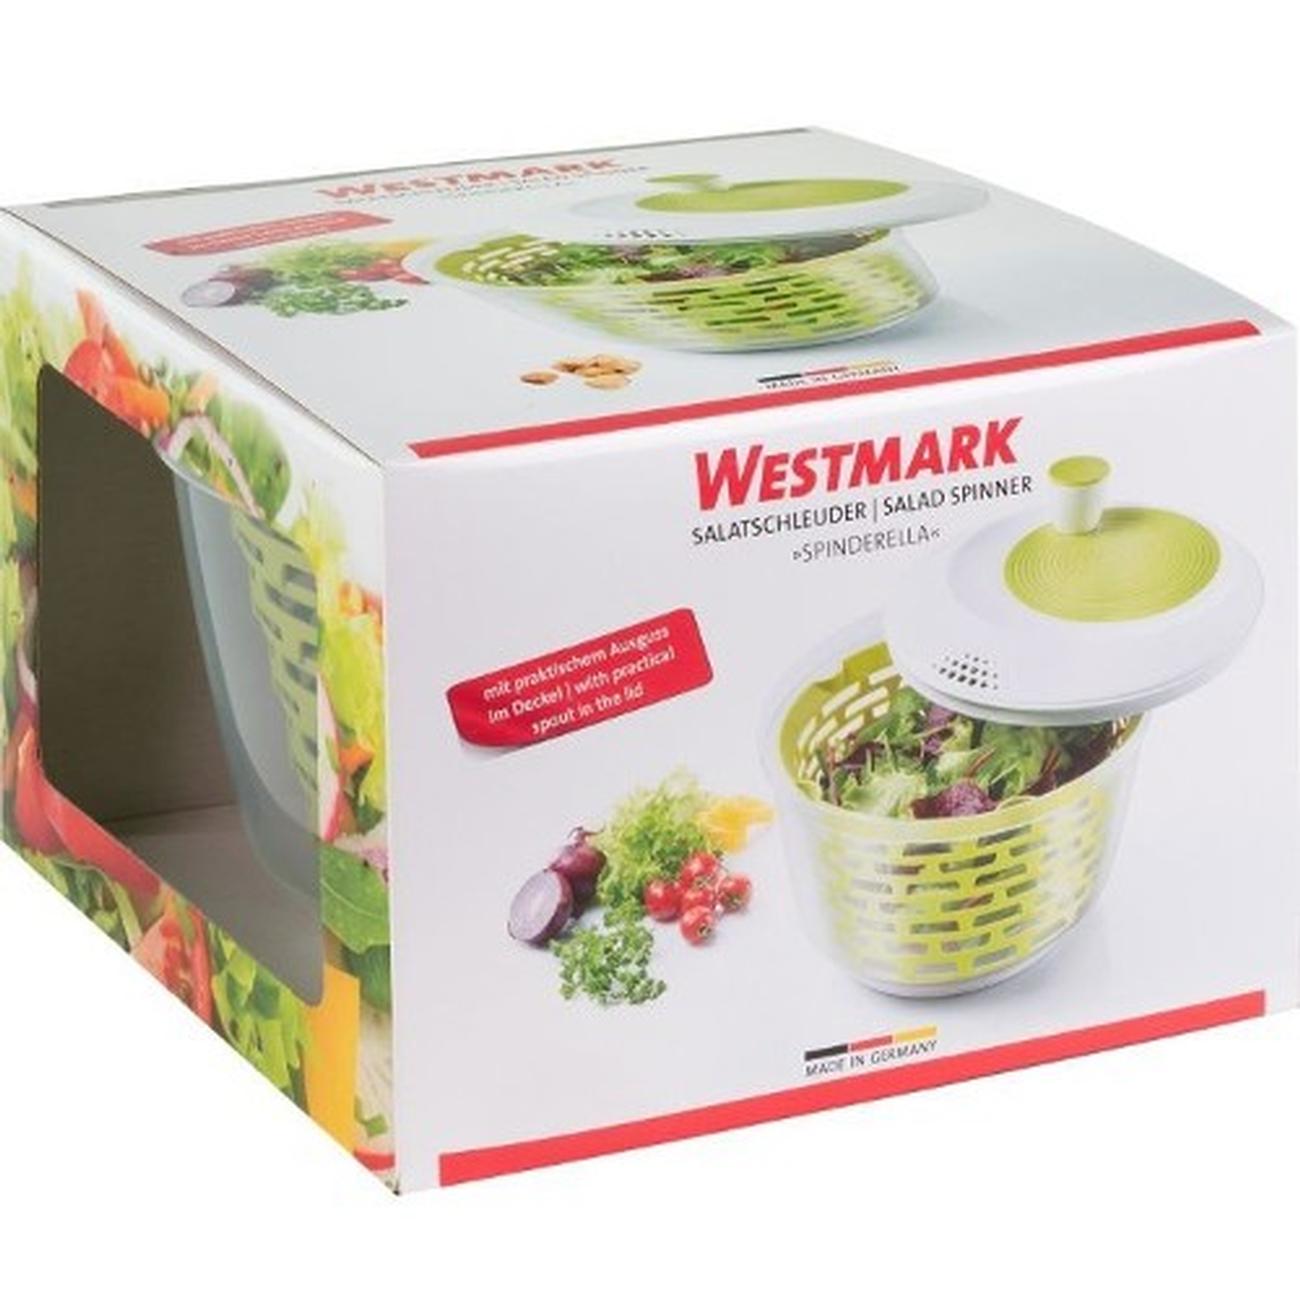 Westmark Germany Vegetable and Salad Spinner with Pouring Spout